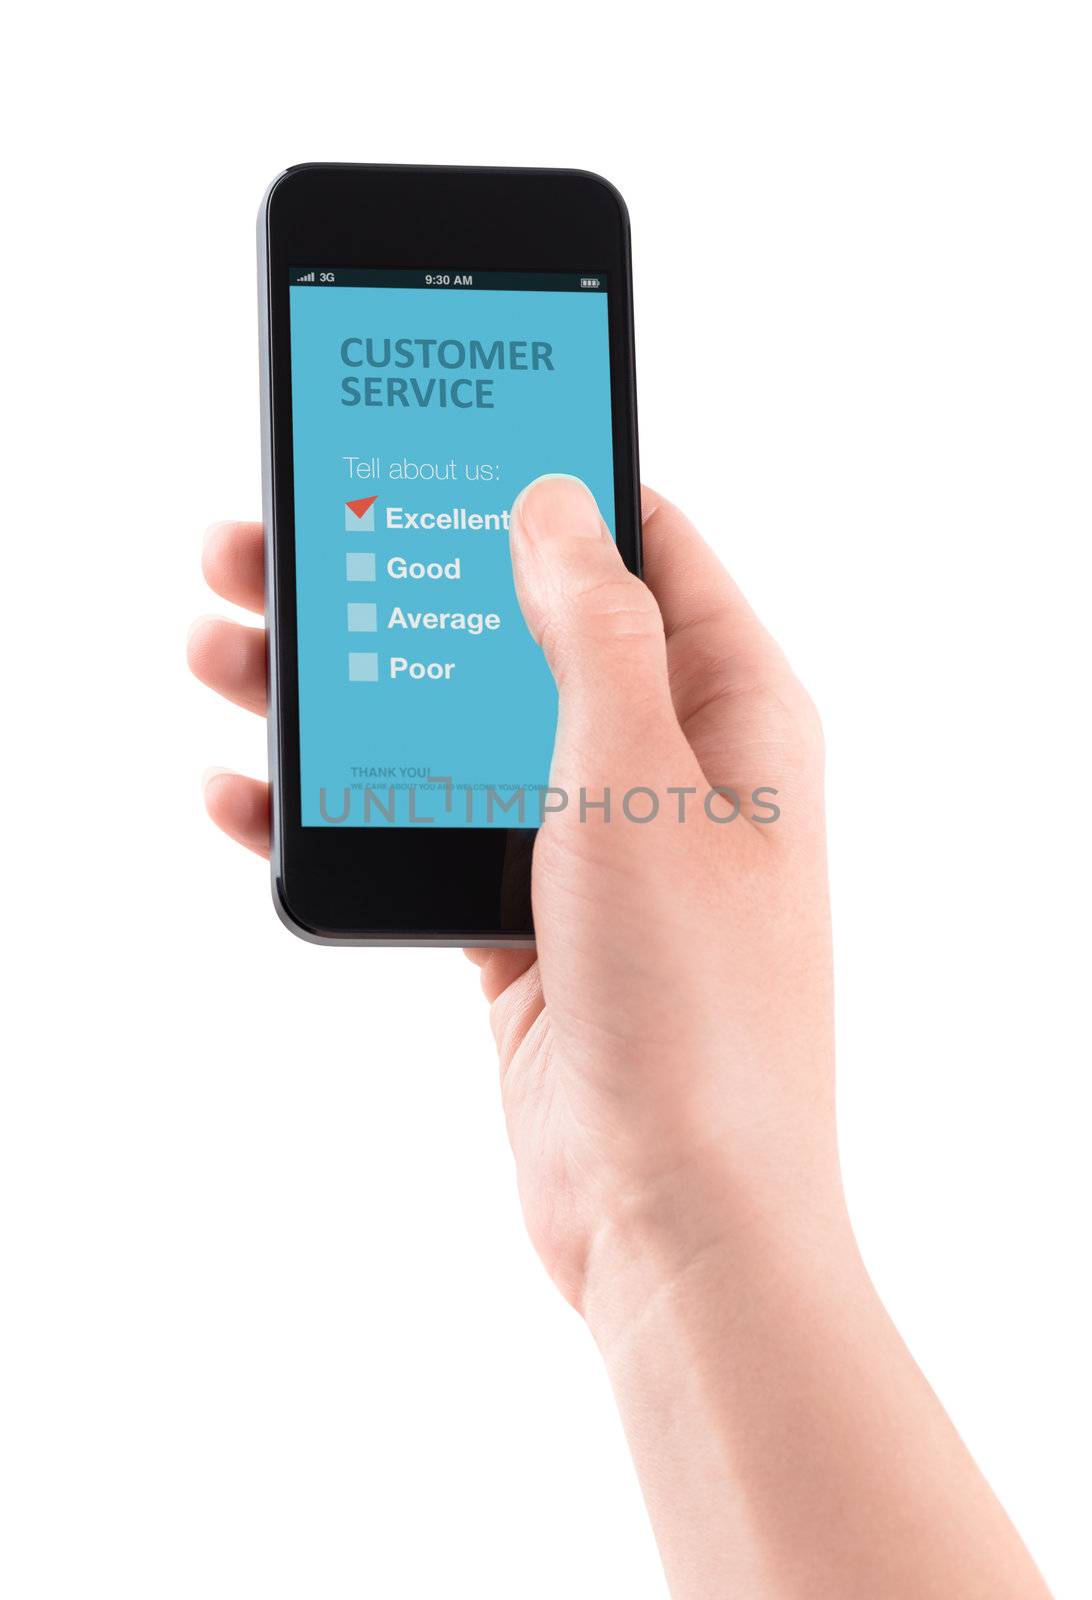 Female hand holding modern smartphone with customer service survey form on a screen. Red tick on excellent choice showing customer satisfaction.